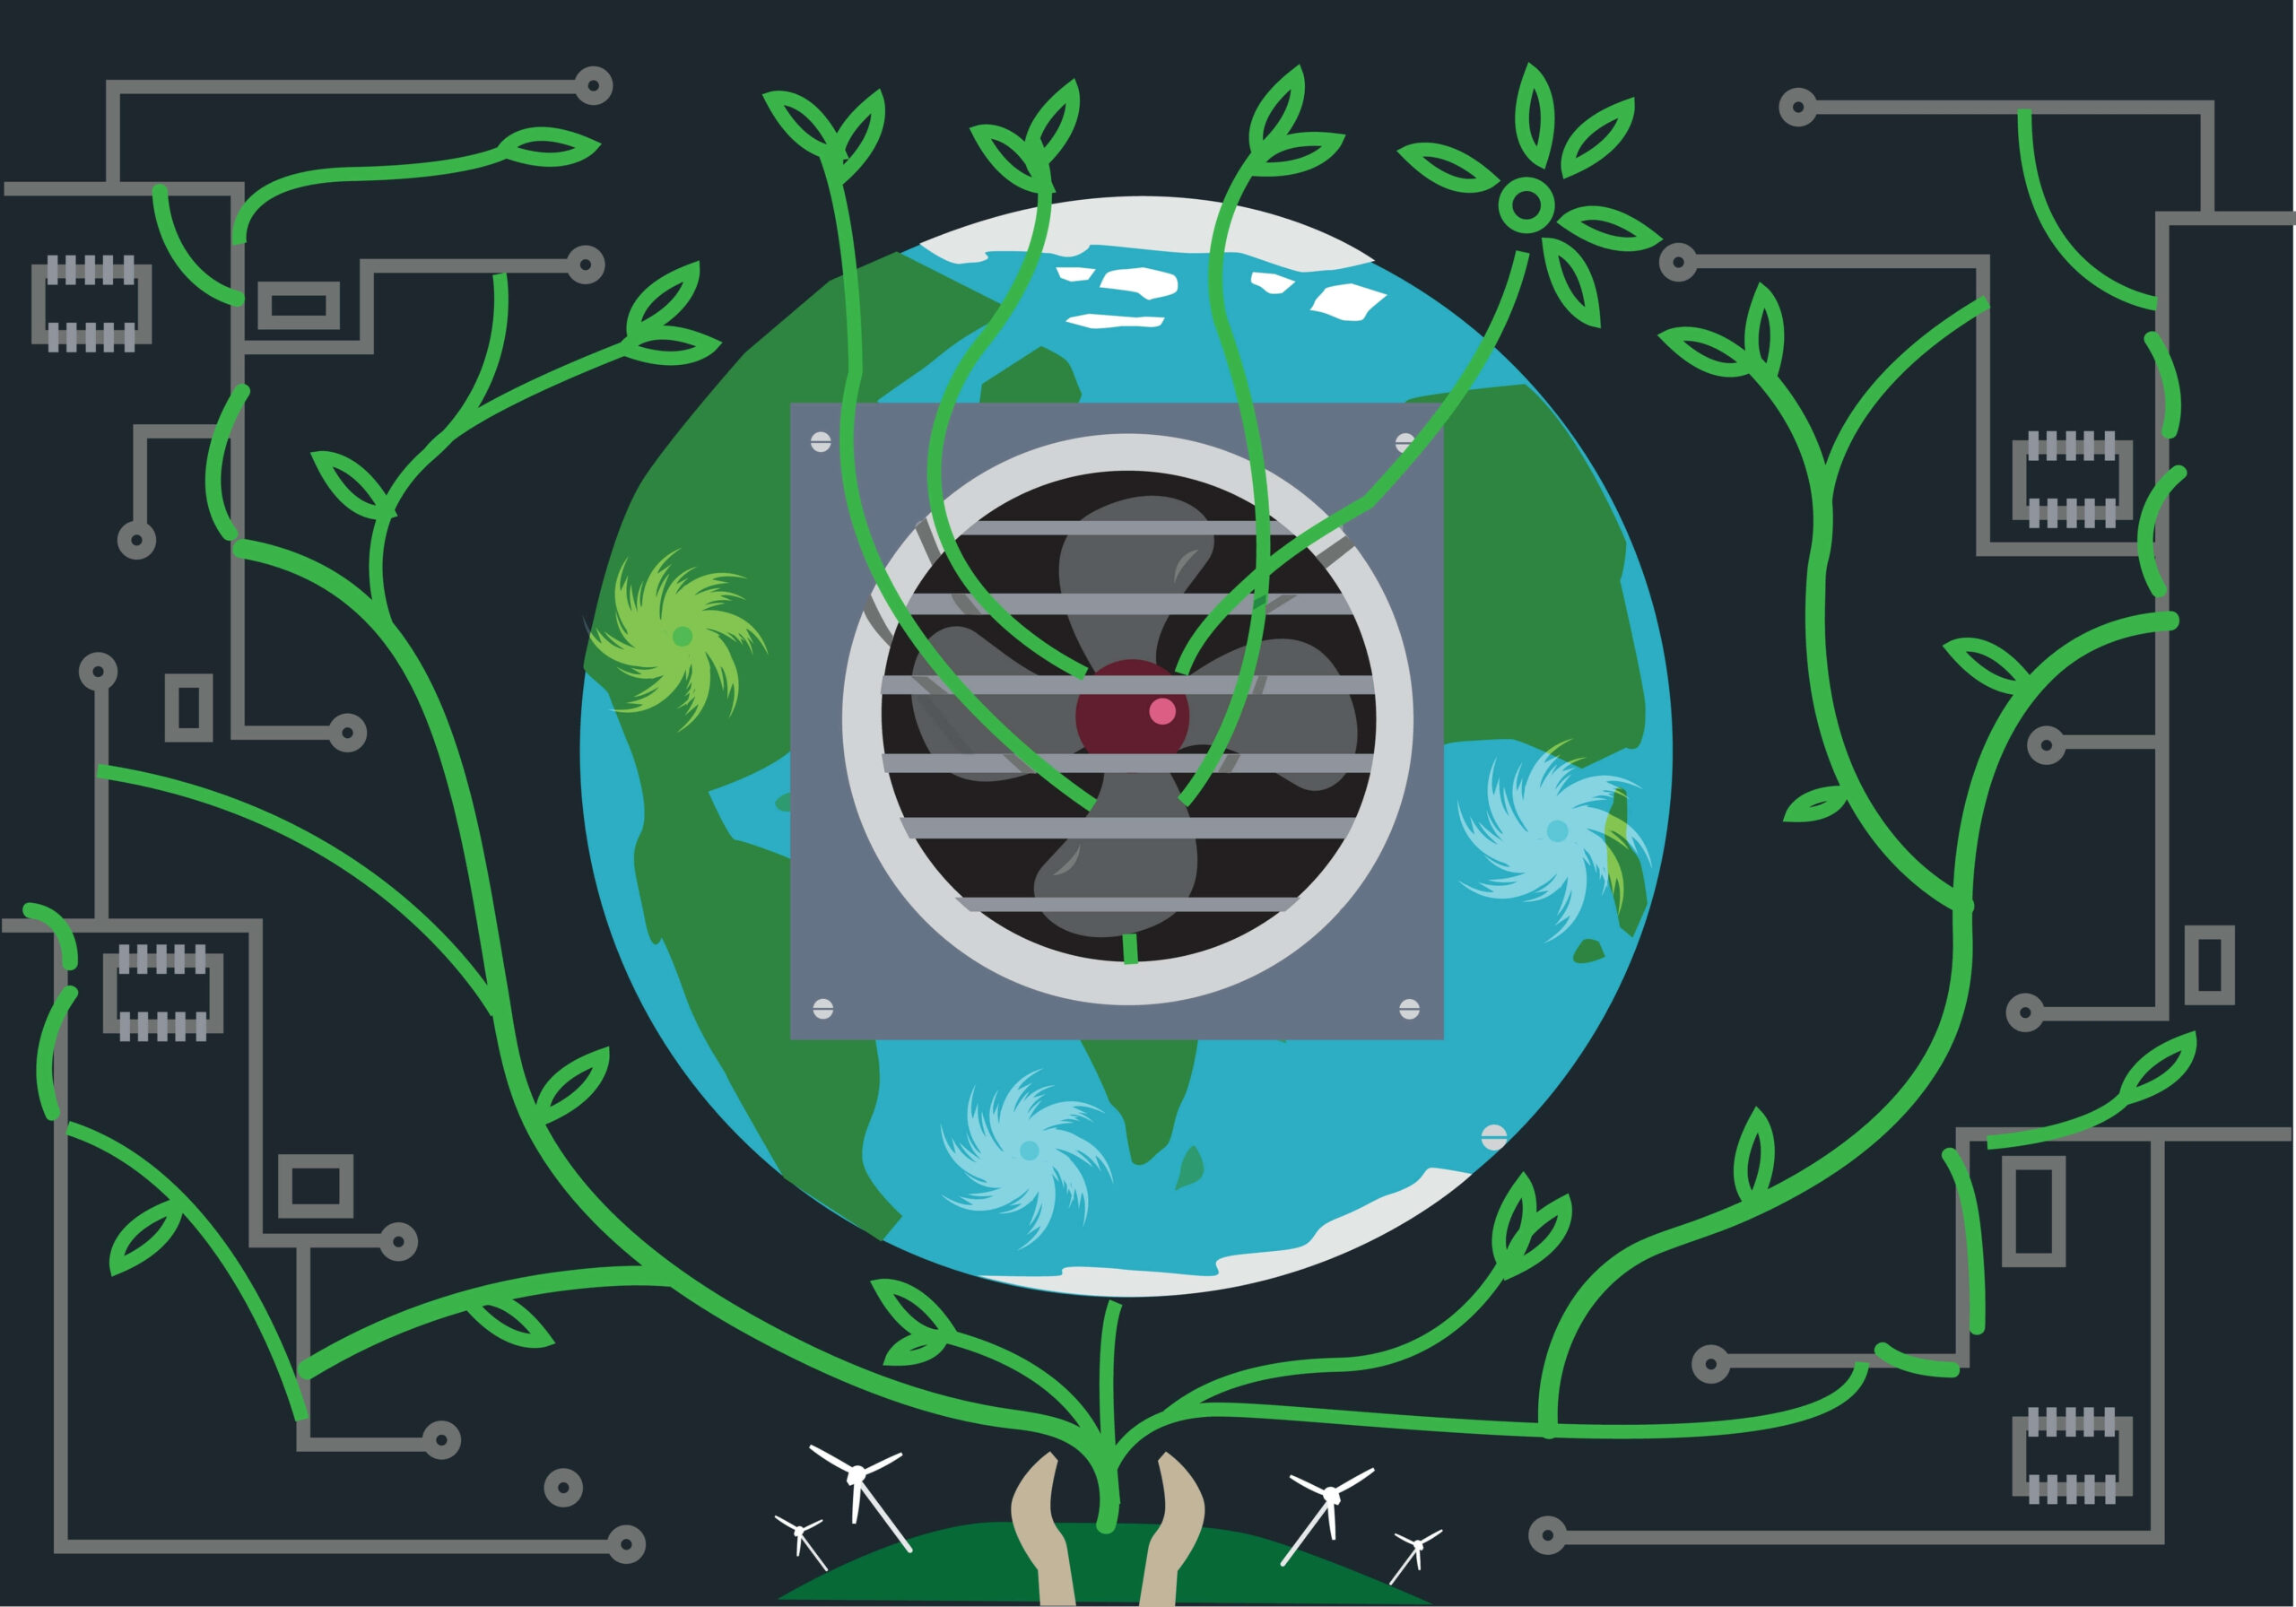 Illustration of fan wrapped with leaves to illustrate crypto climate change